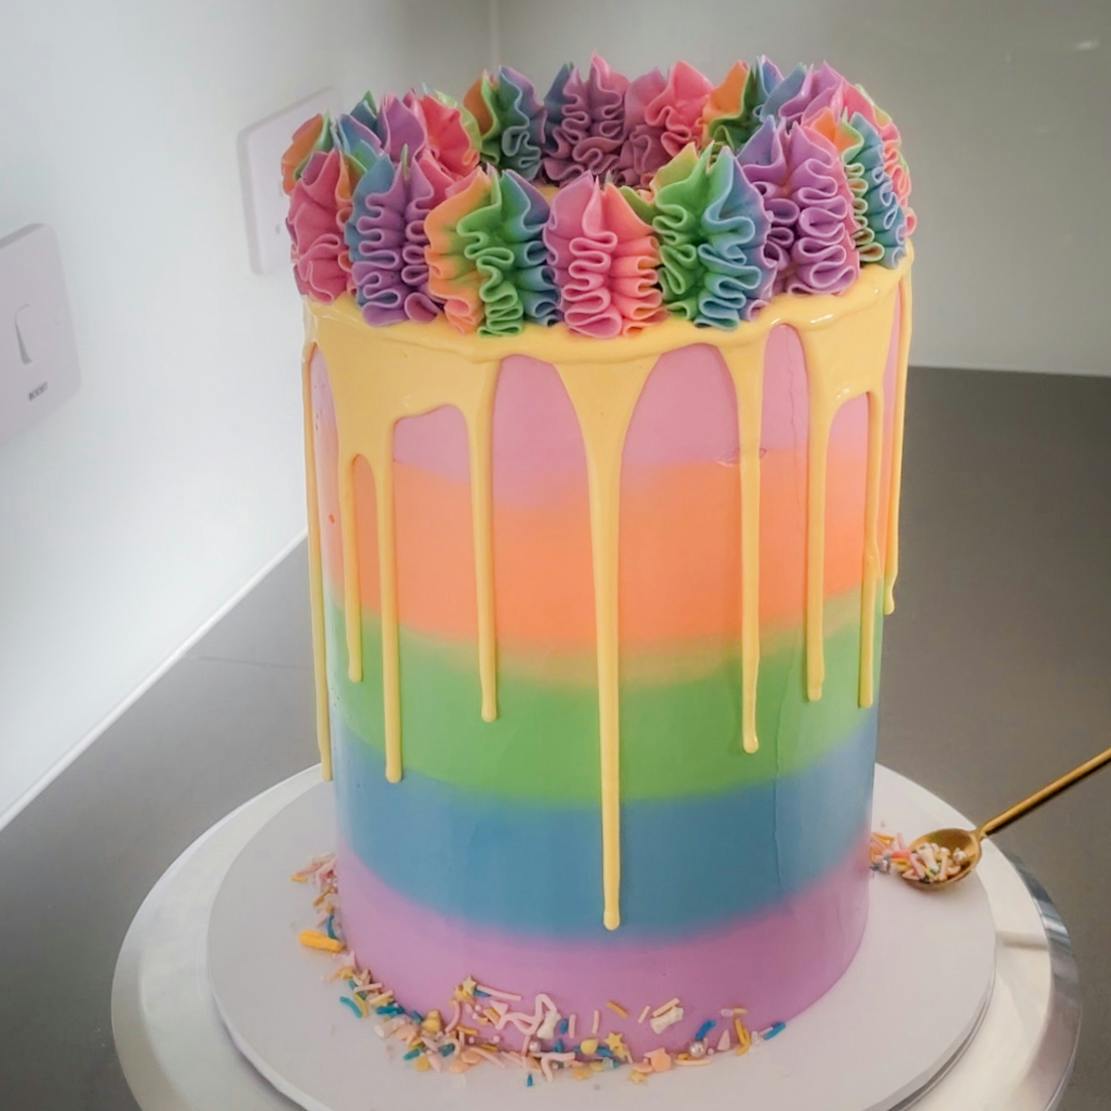 How to Frost a Rainbow Cake | LoveCrafts